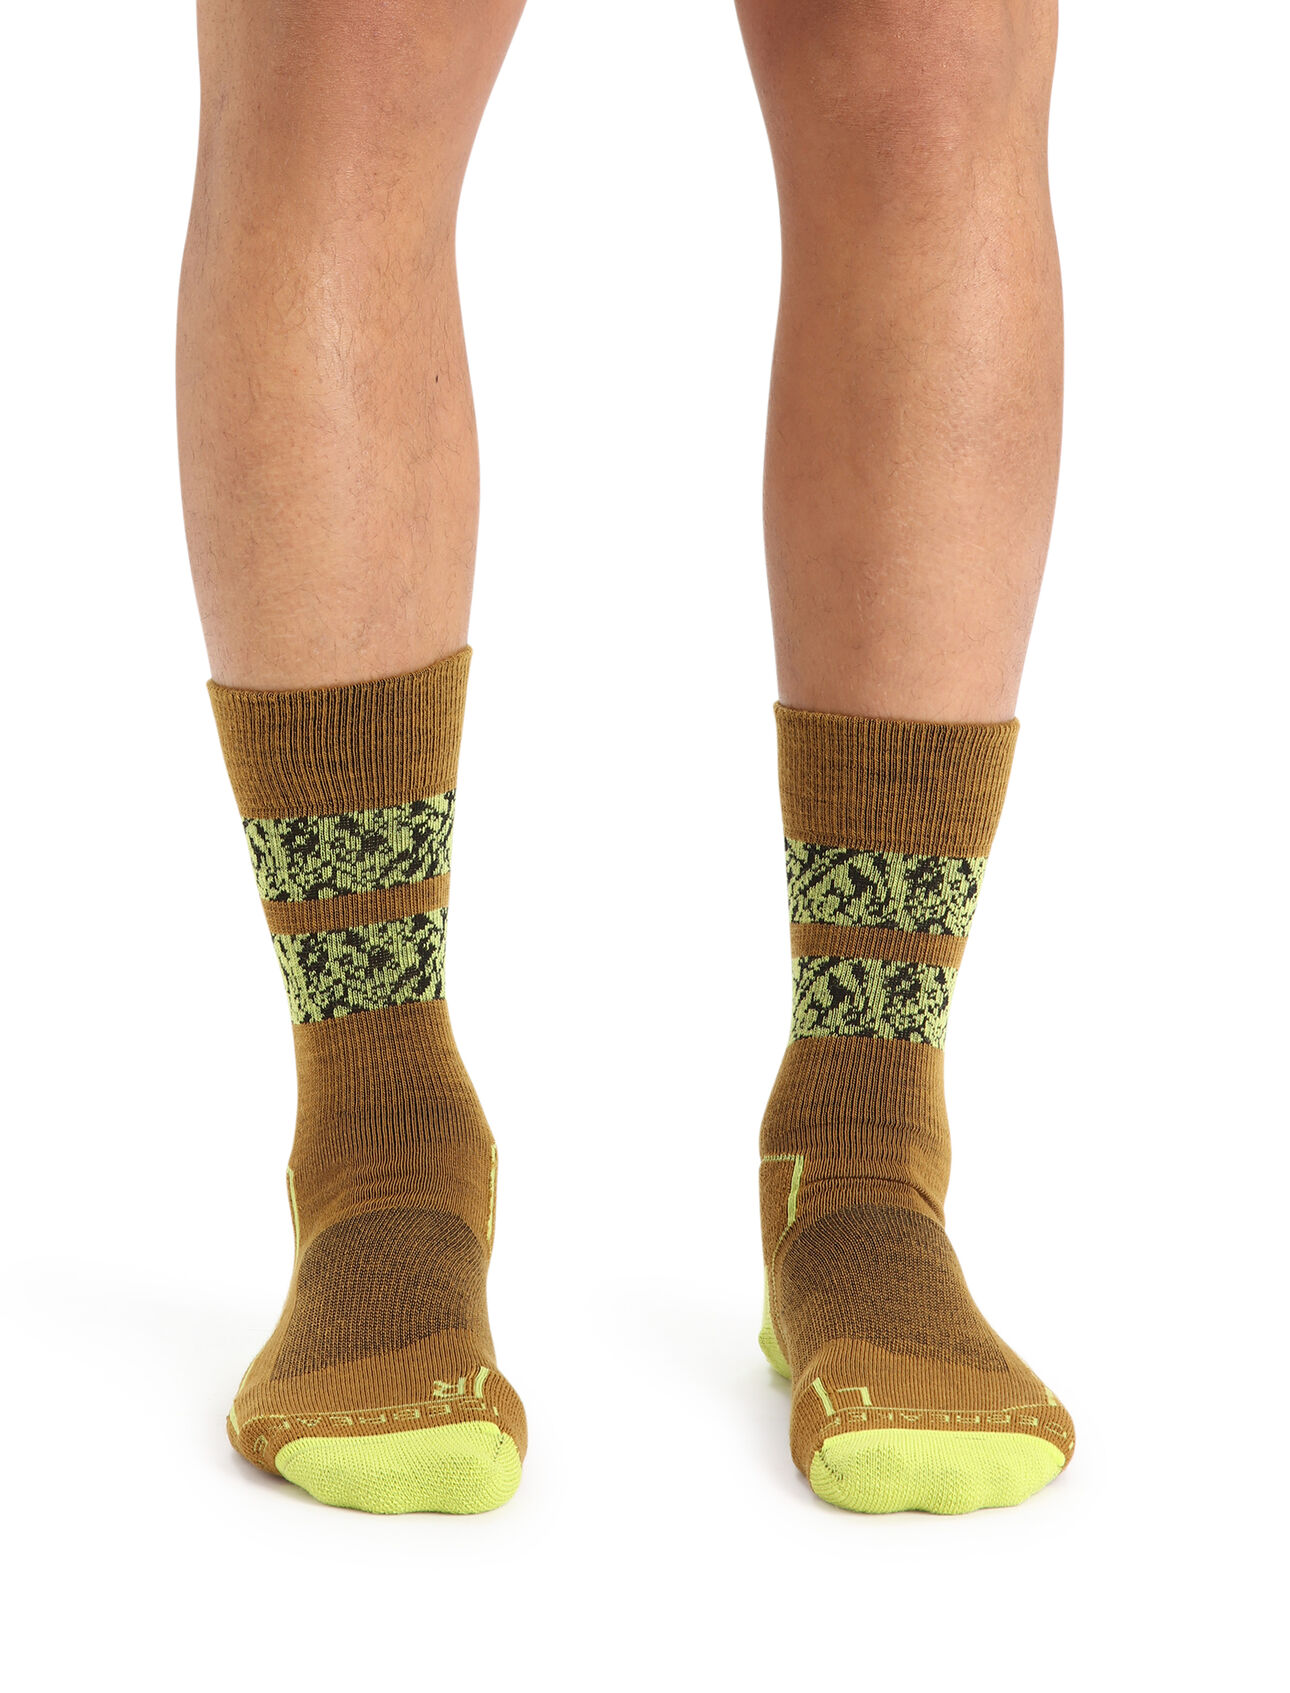 Mens Merino Hike+ Light Crew Socks Natural Summit Durable, crew-length merino wool socks that are stretchy, breathable, and naturally odor-resistant with full cushion, the Hike+ Light Crew Natural Summit socks feature an anatomical sculpted design for day hikes and backpacking trips.